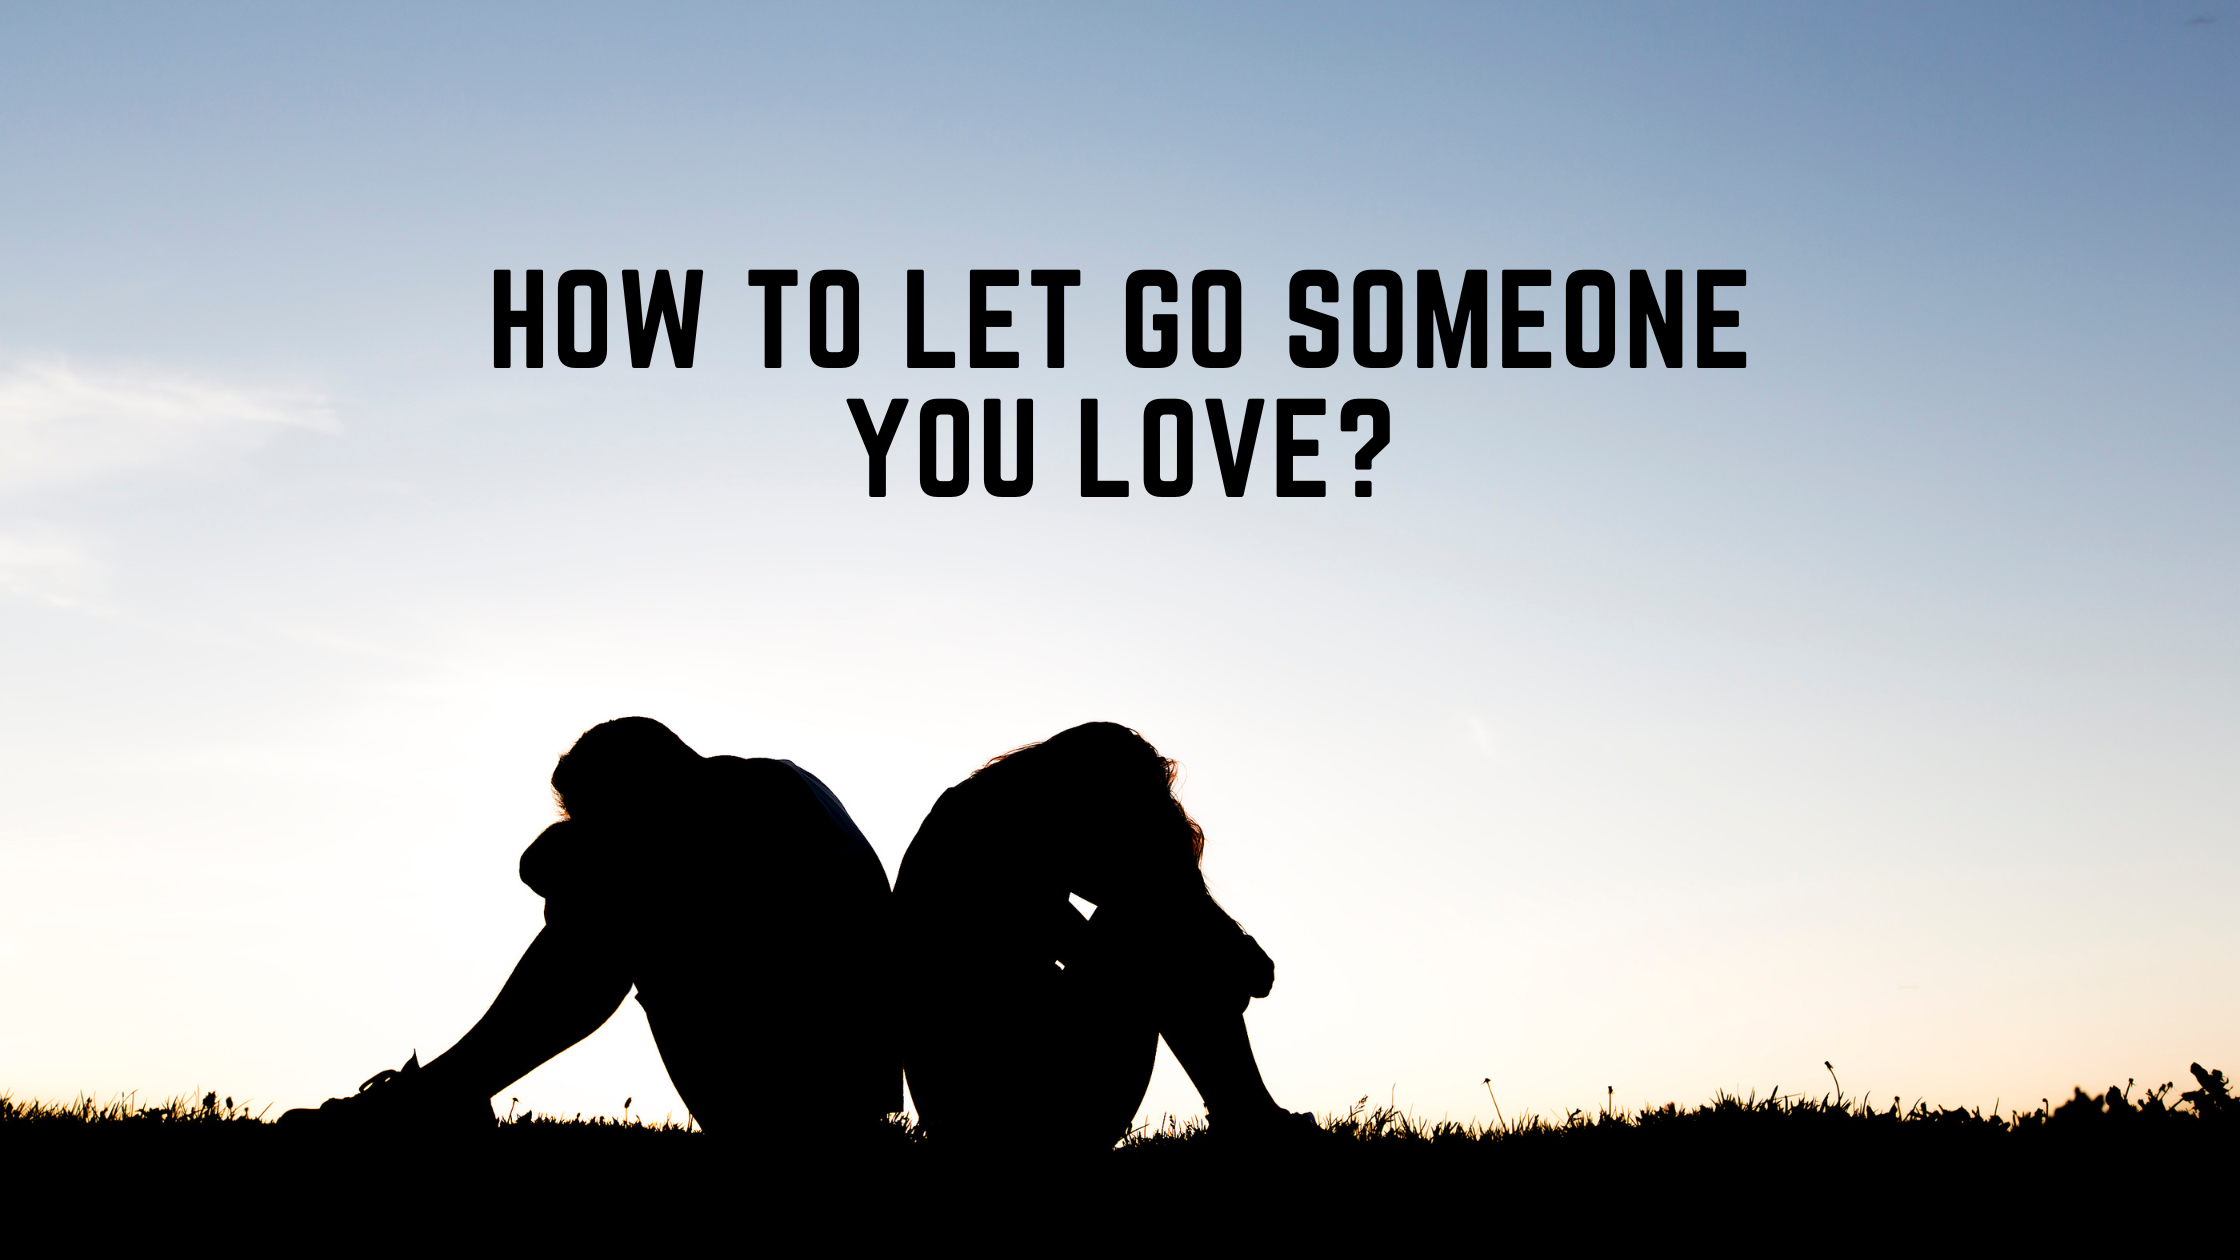 How to let go someone you love